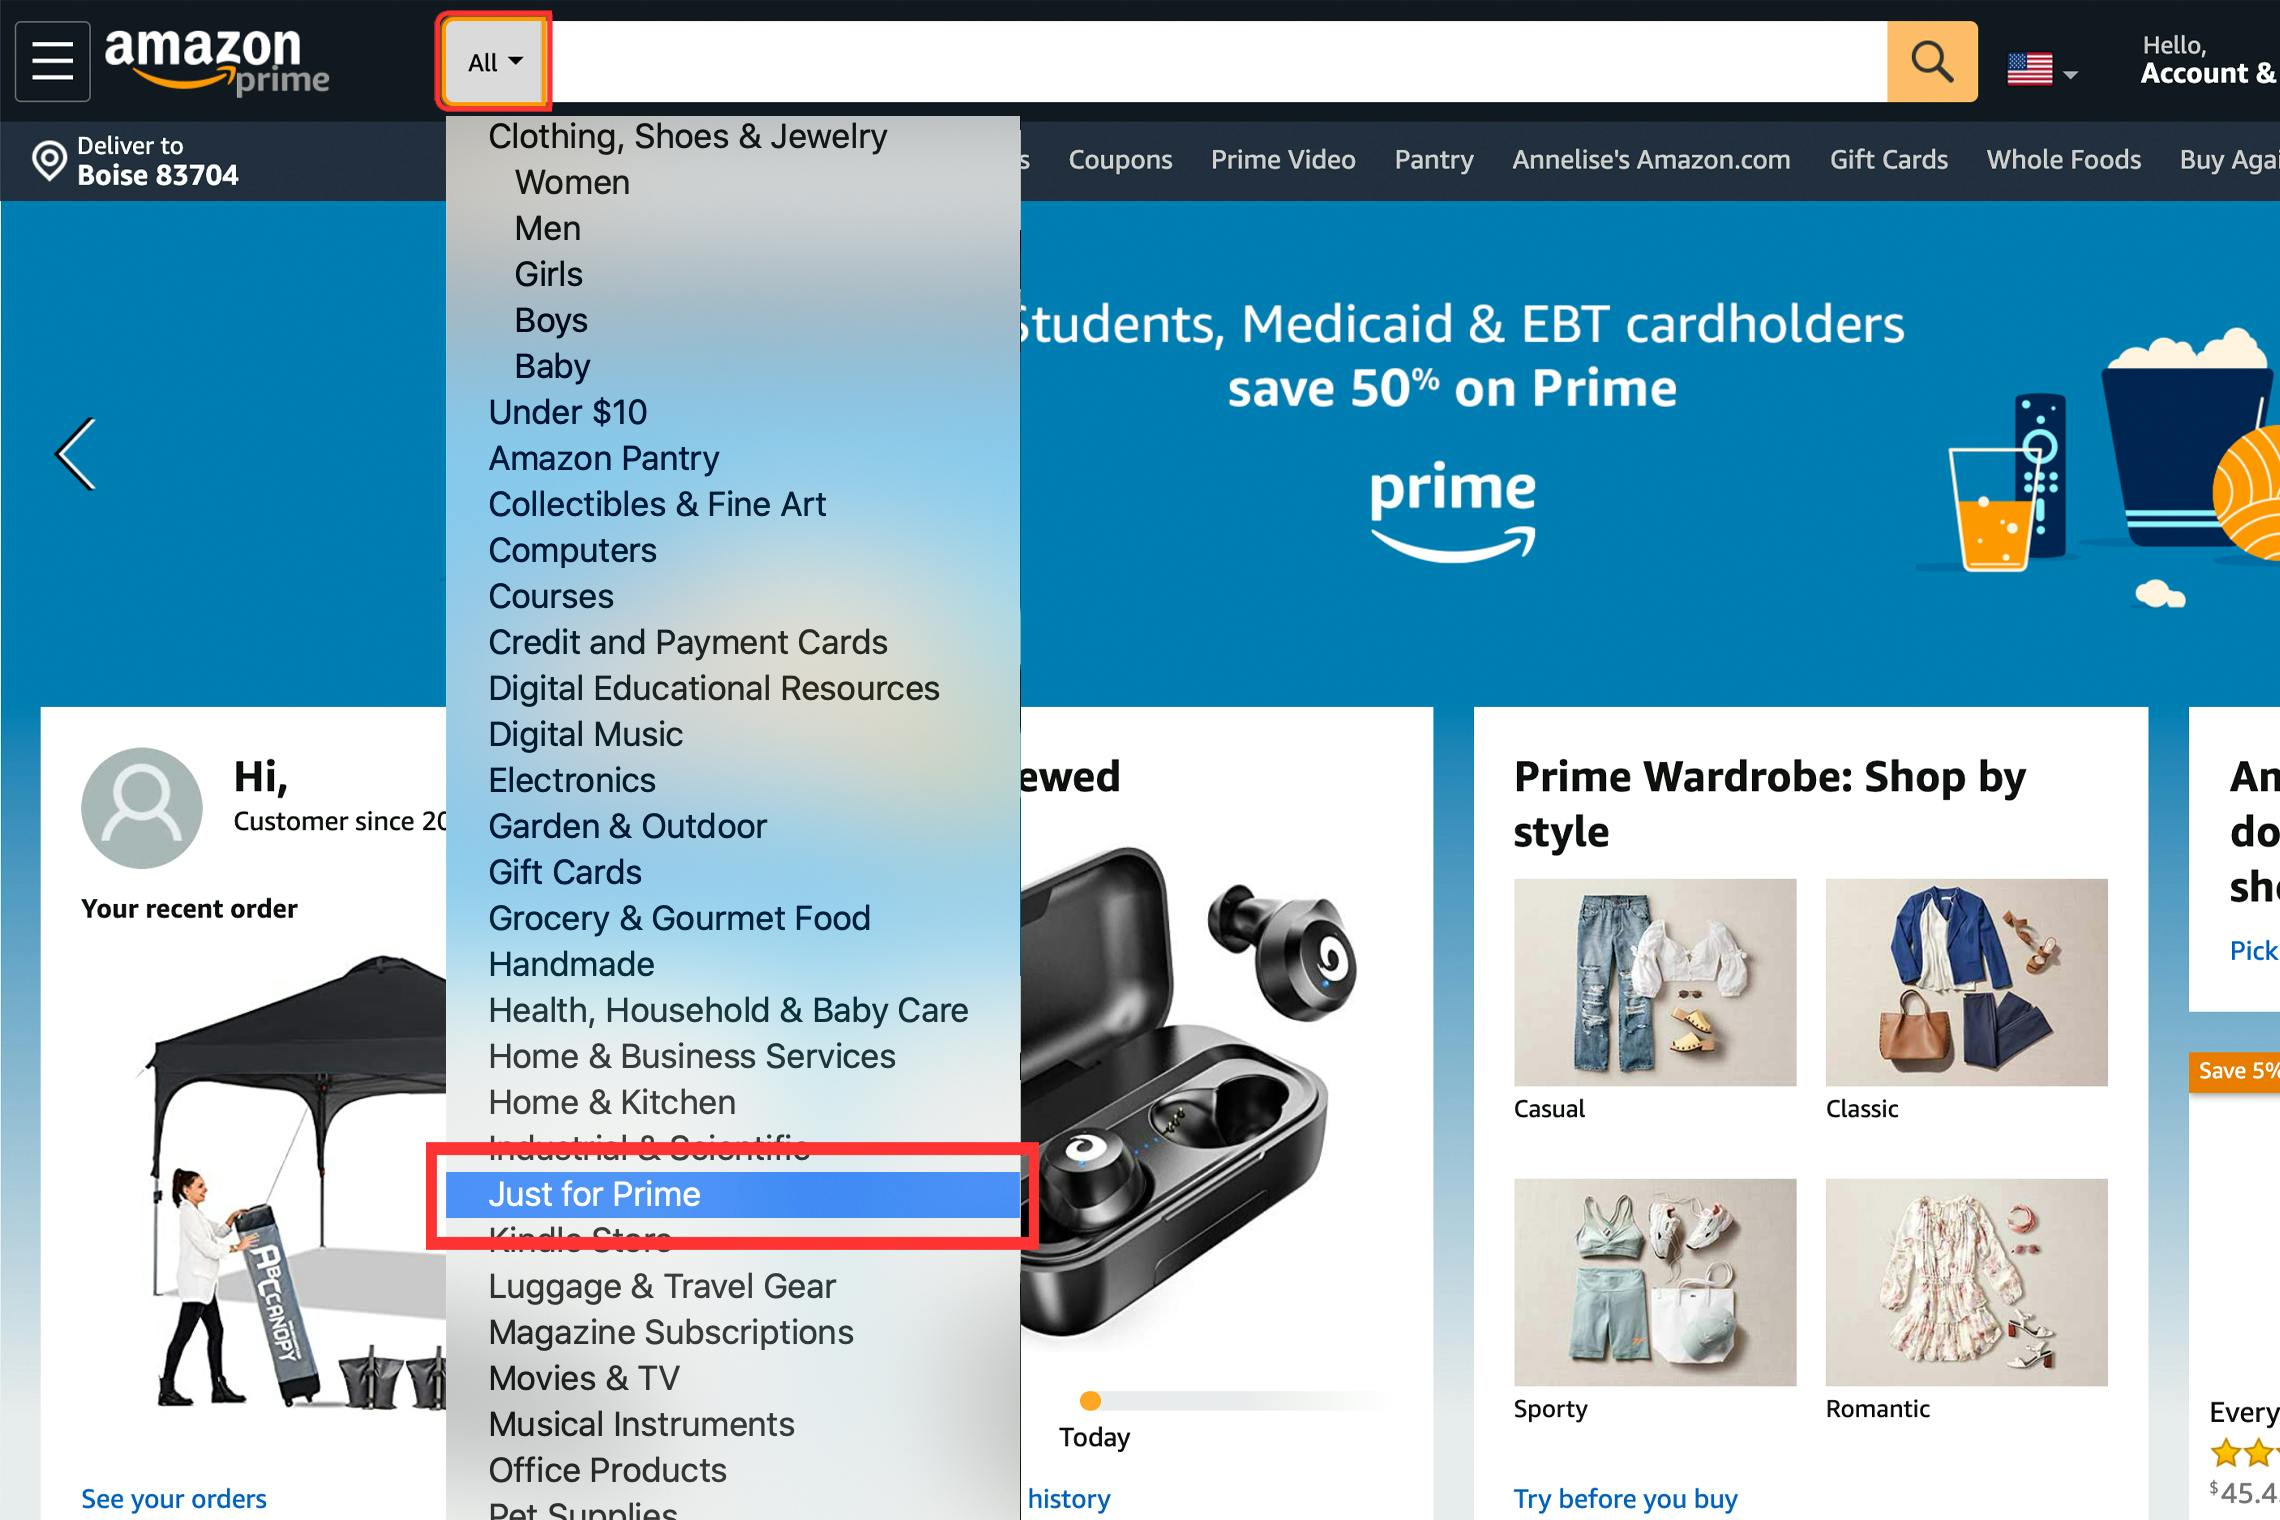 A screenshot of the Amazon home page with a drop down menu, highlighting the Just for Prime option.